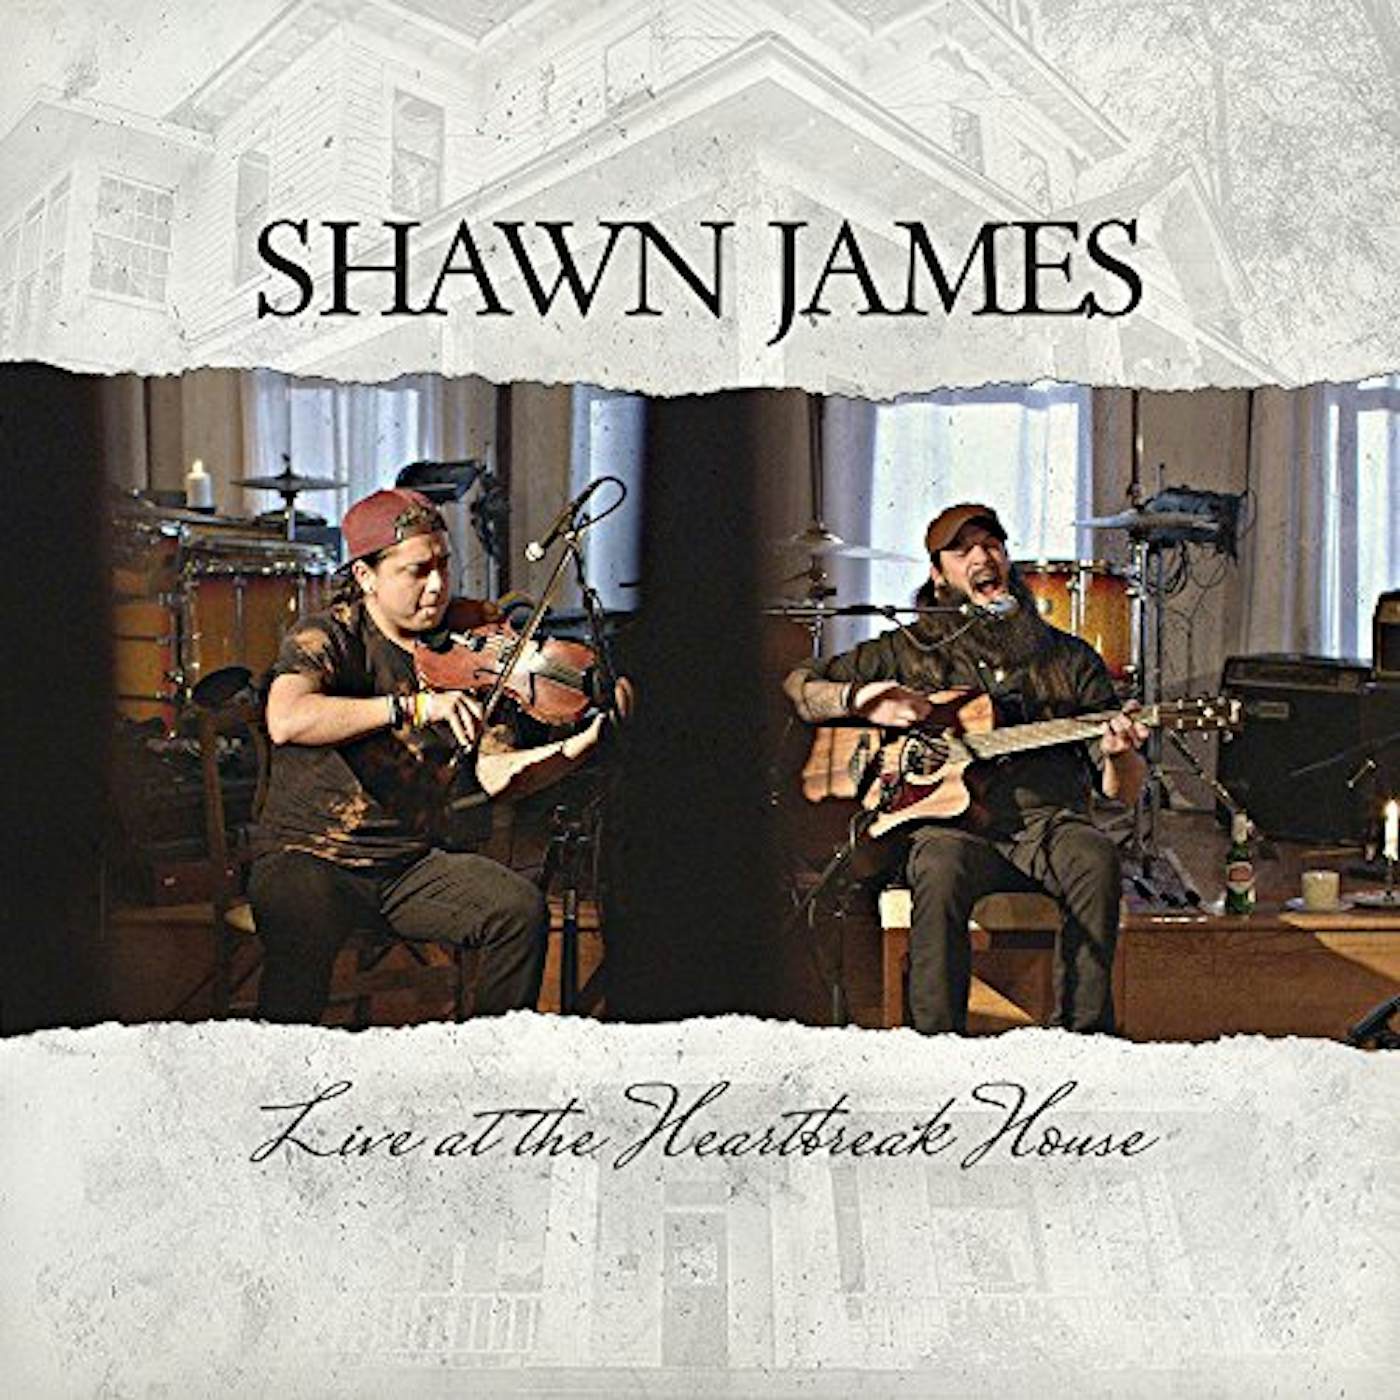 Shawn James 430024 LIVE AT THE HEARTBREAK HOUSE Vinyl Record